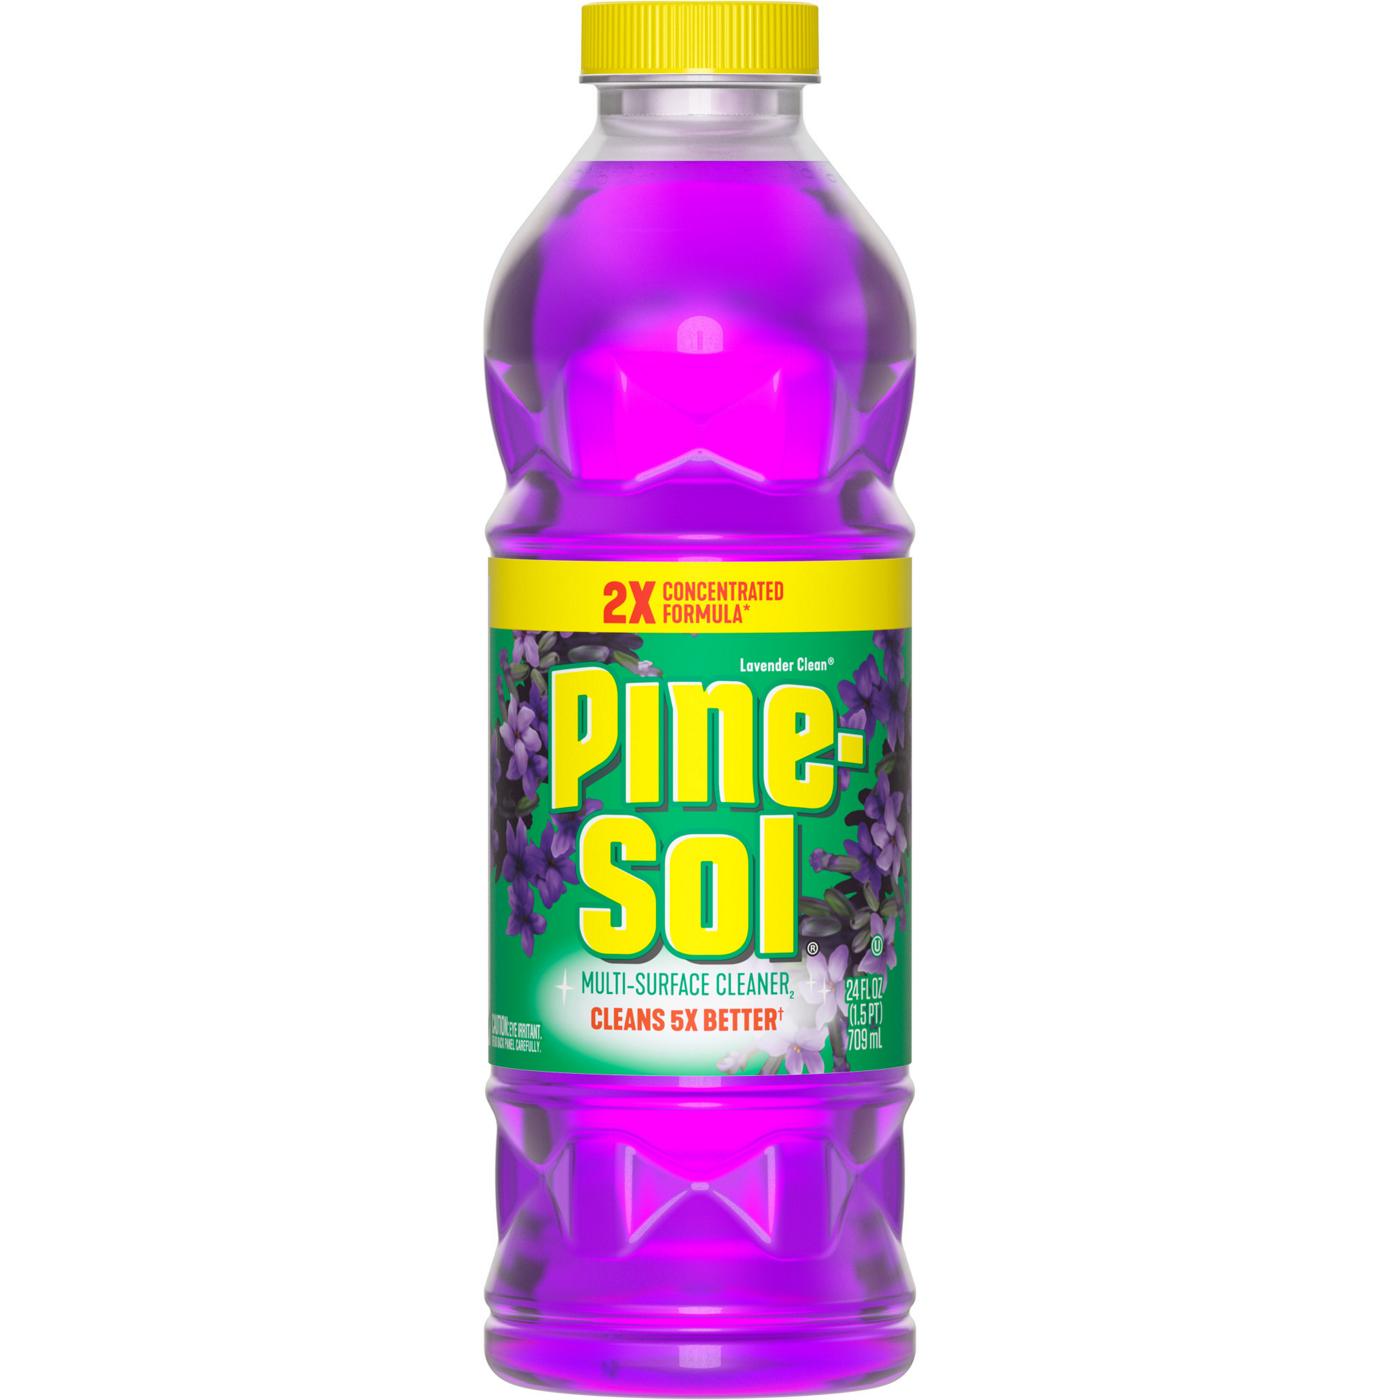 Pine-Sol Lavender Clean Multi-Surface Cleaner; image 1 of 9